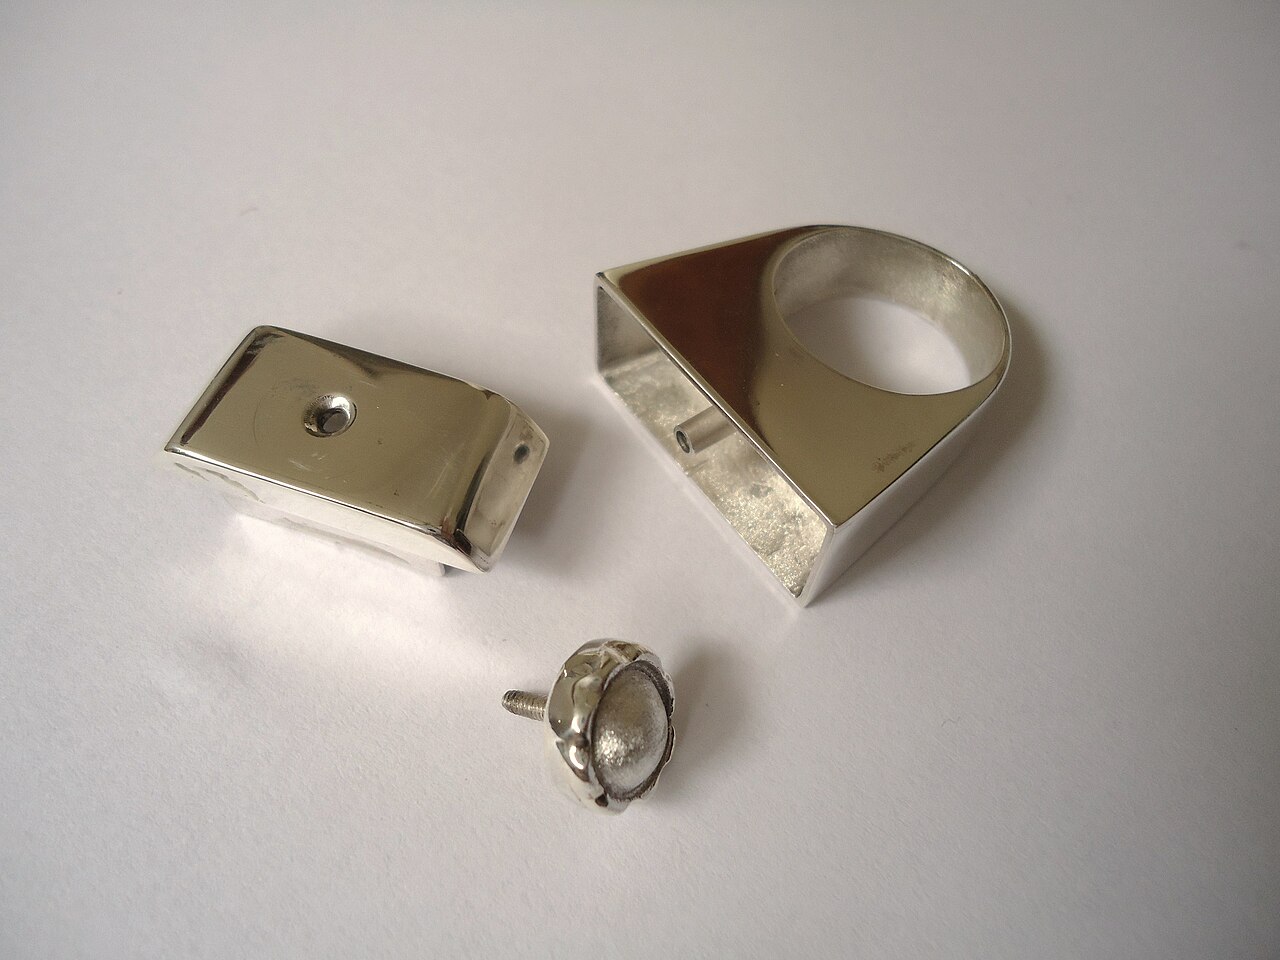 File:Silver ring and box.JPG